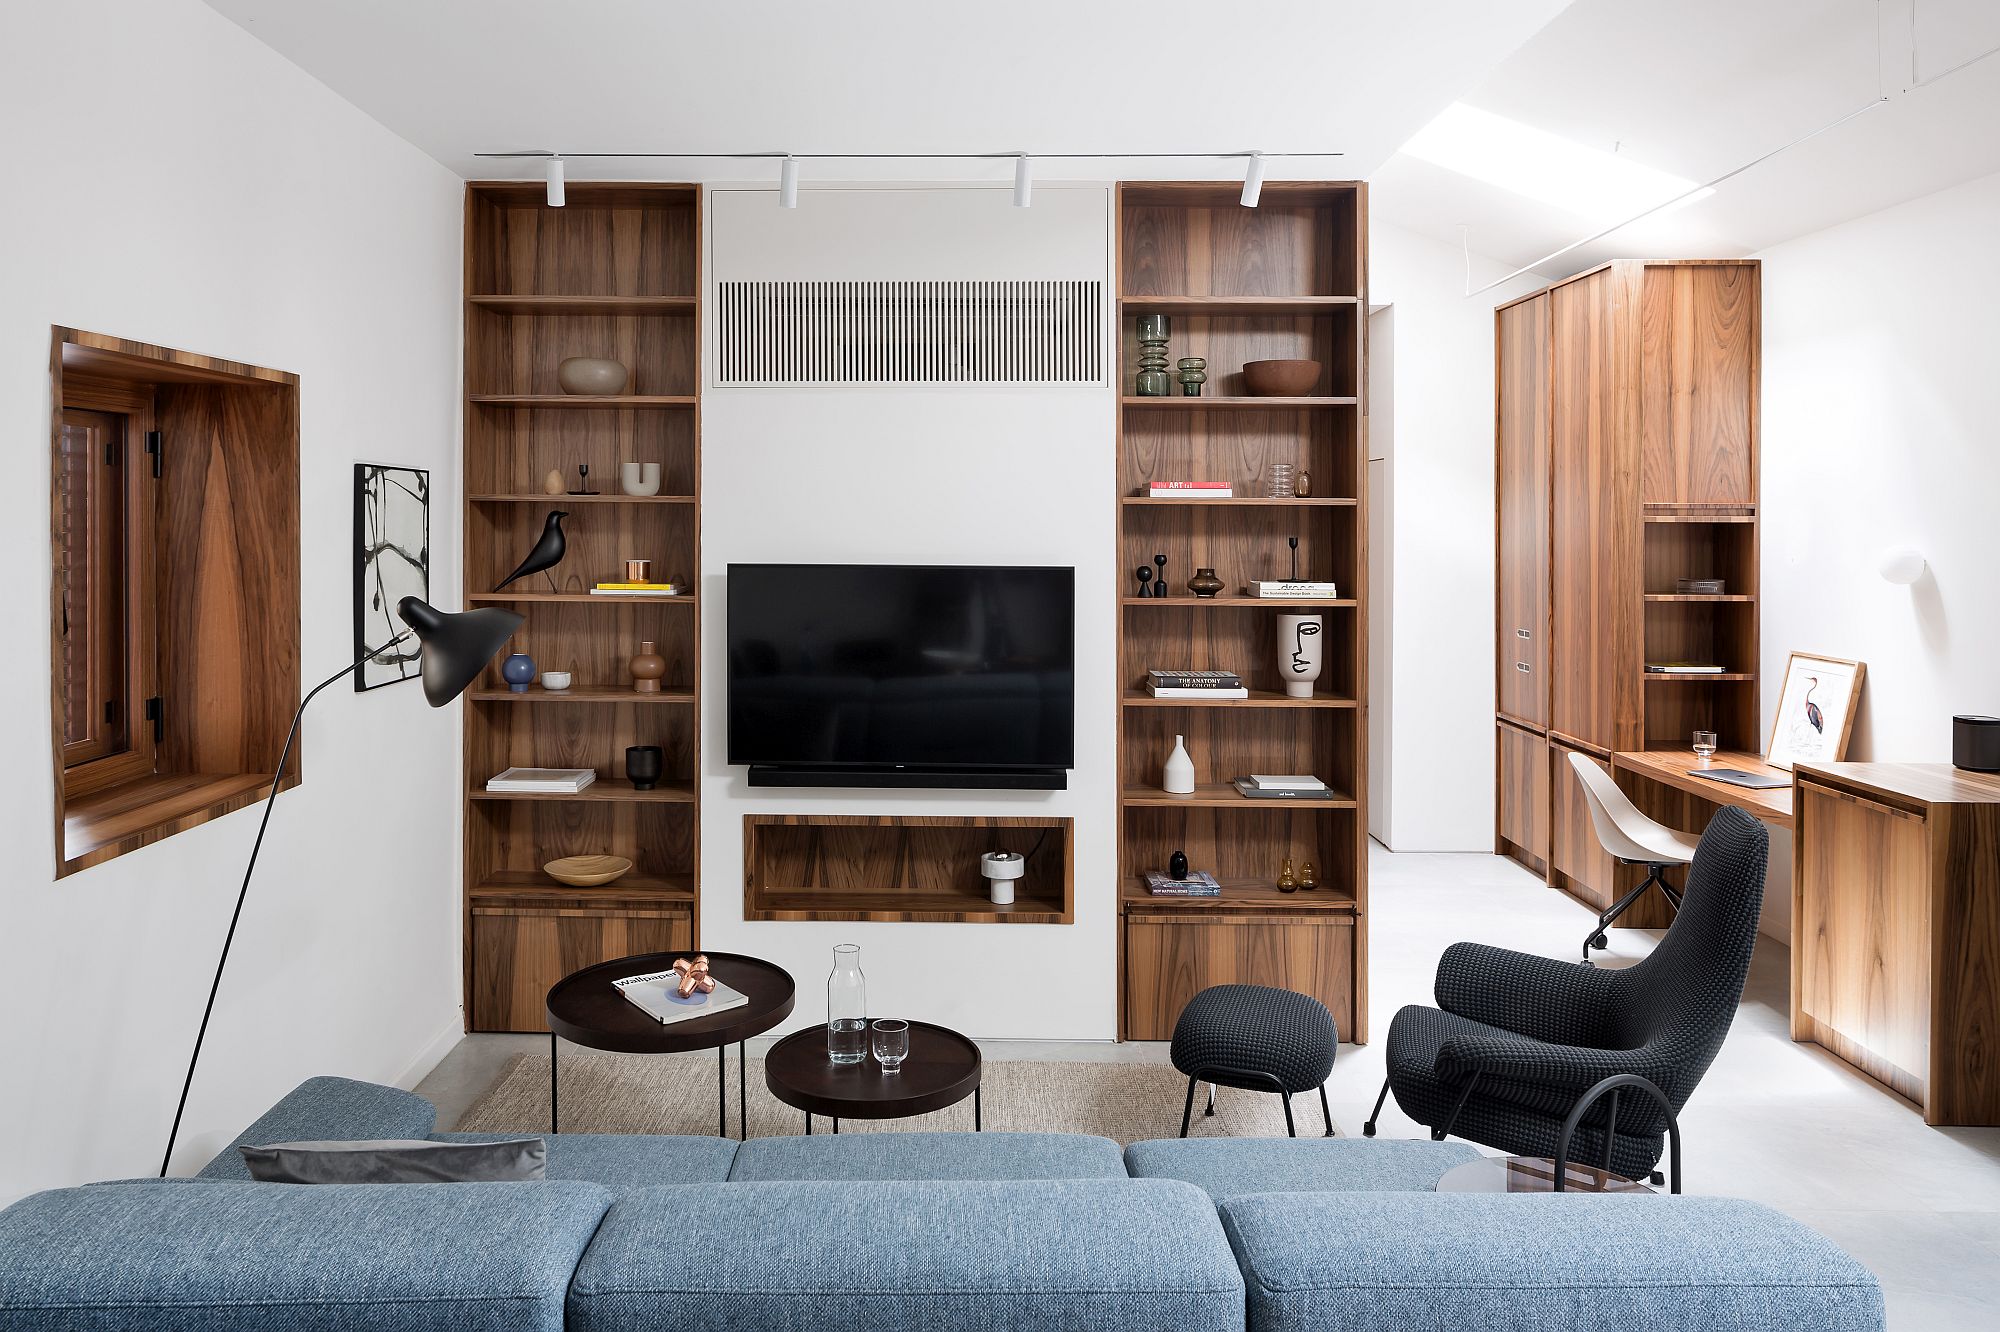 Wooden-shelves-next-to-the-television-add-to-the-unique-appeal-of-the-living-room-45041